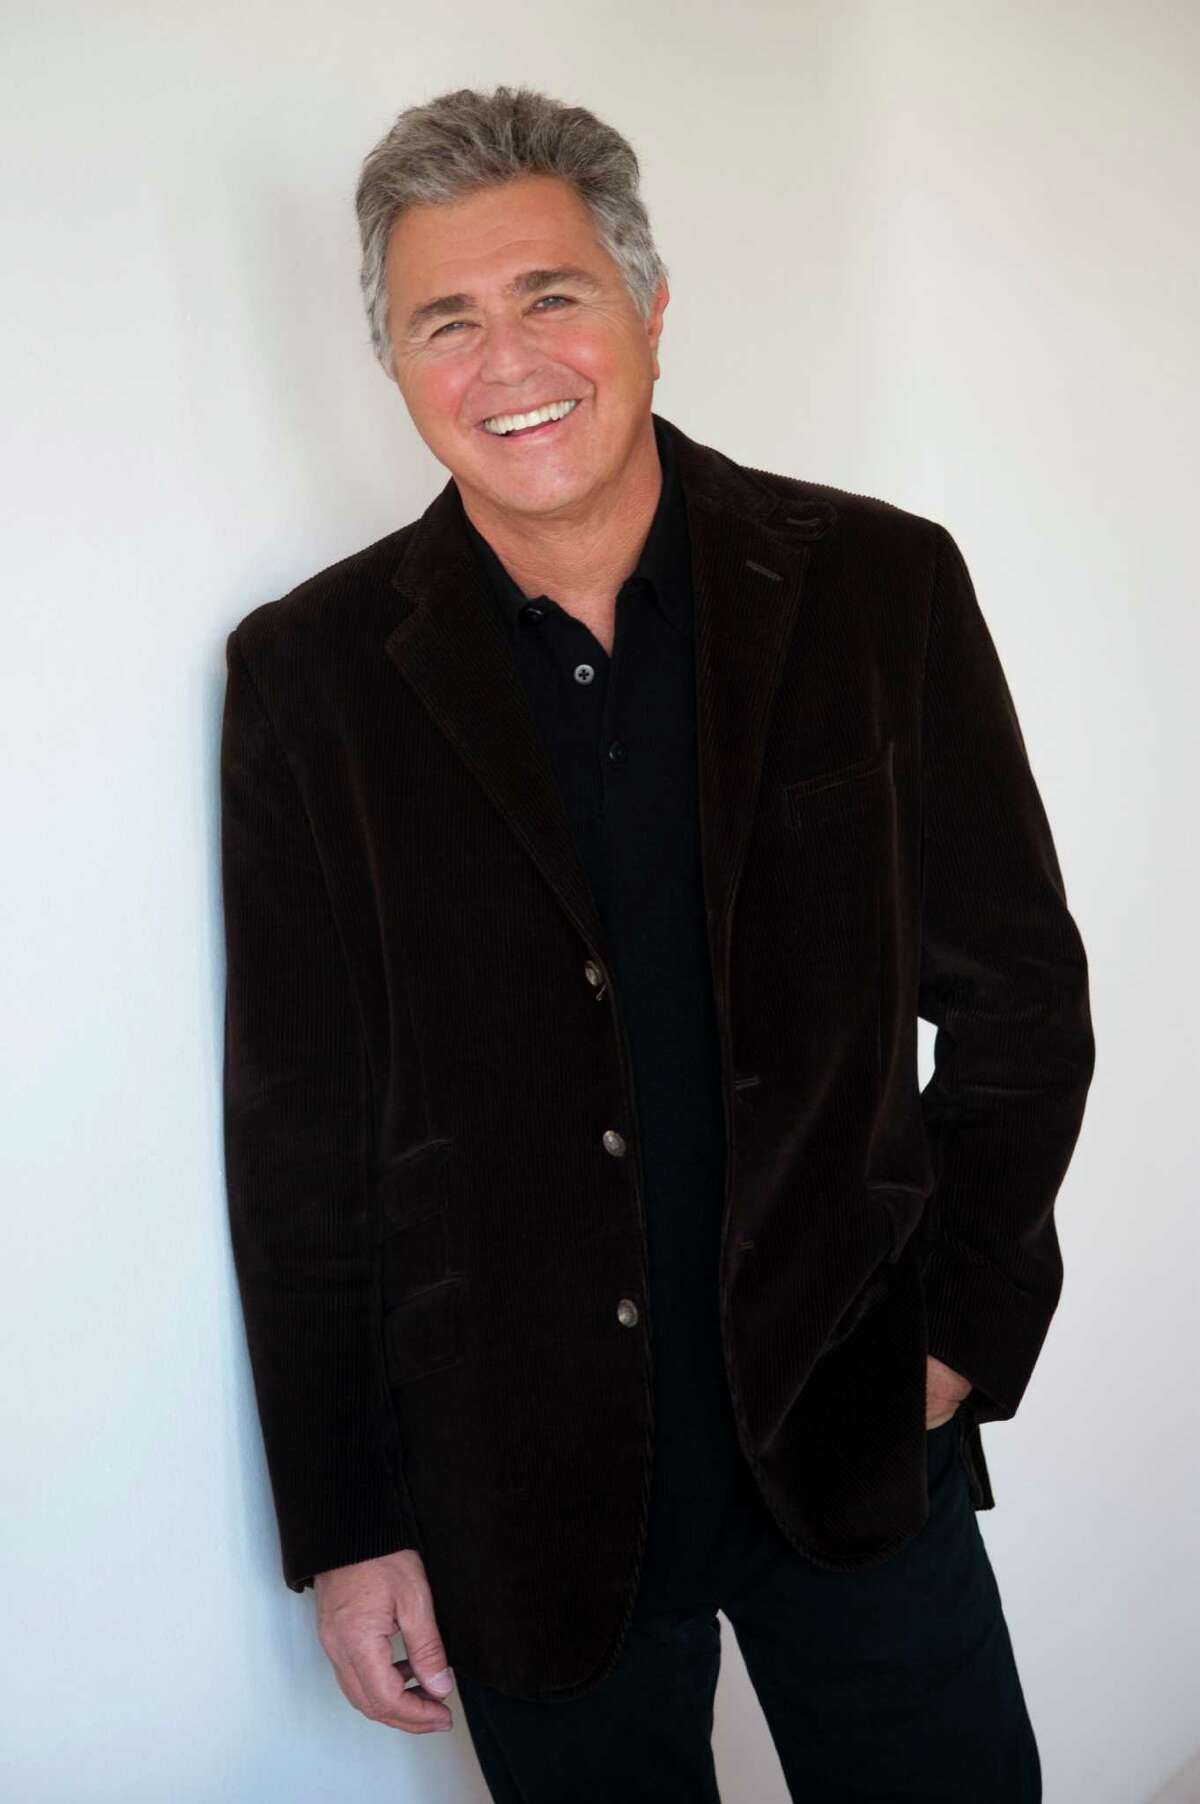 Steve Tyrell brings the American Song Book to life in a performance at the Fairfield Theatre Company on Sunday, May 4.